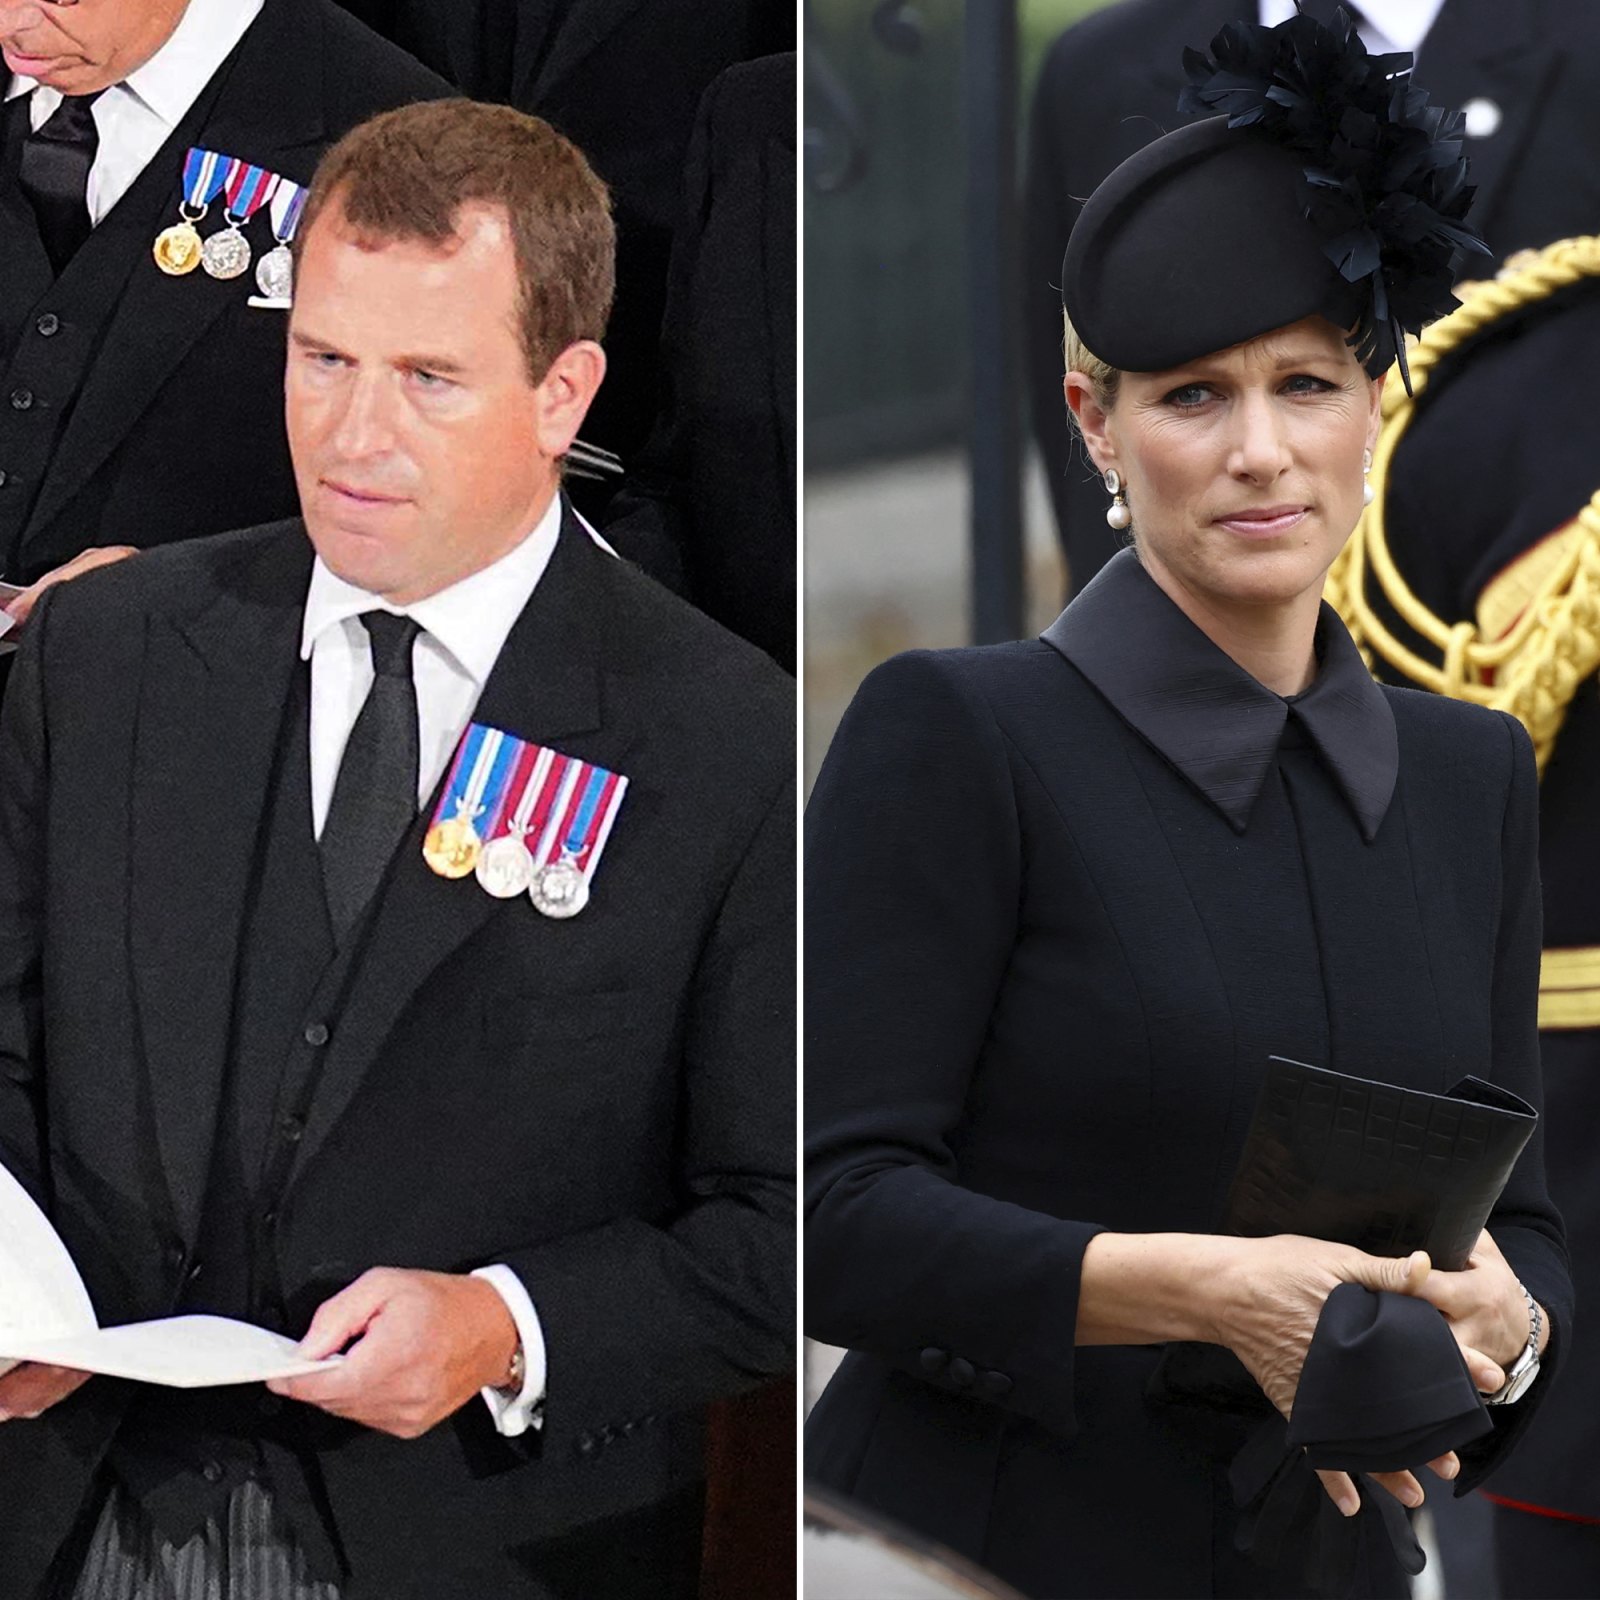 Princess Anne’s Children Peter Phillips and Zara Tindall Pay Their Respects to Grandmother Queen Elizabeth II at State Funeral